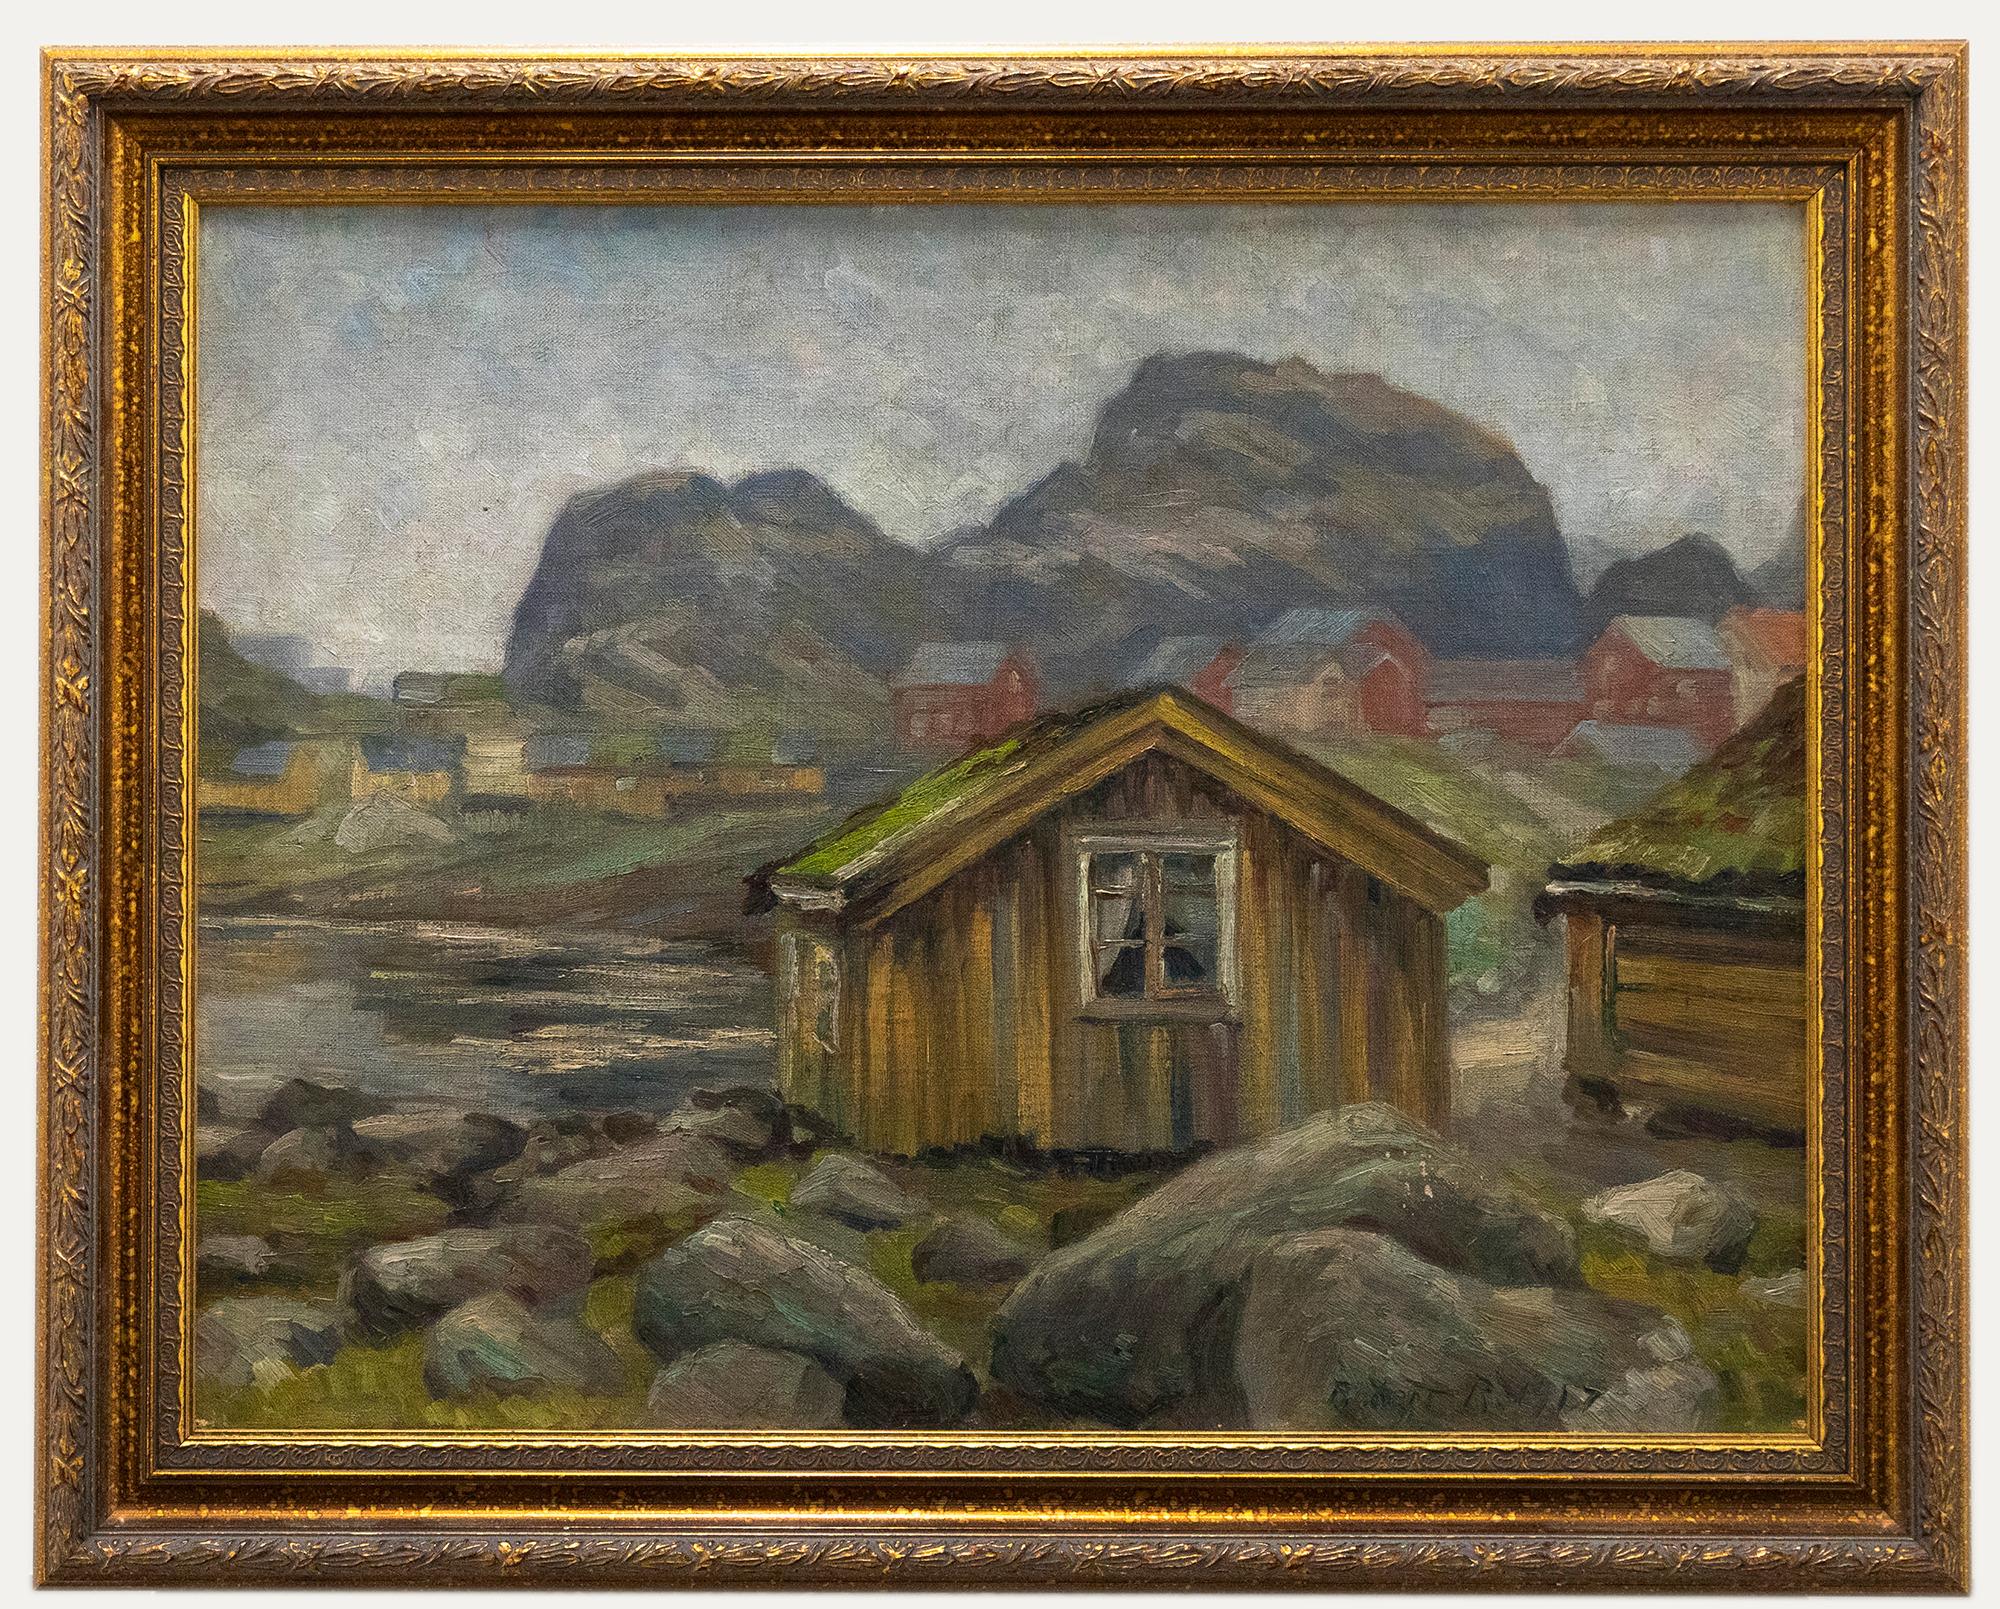 Unknown Landscape Painting - Robert R. - 1917 Oil, Lake Chalet